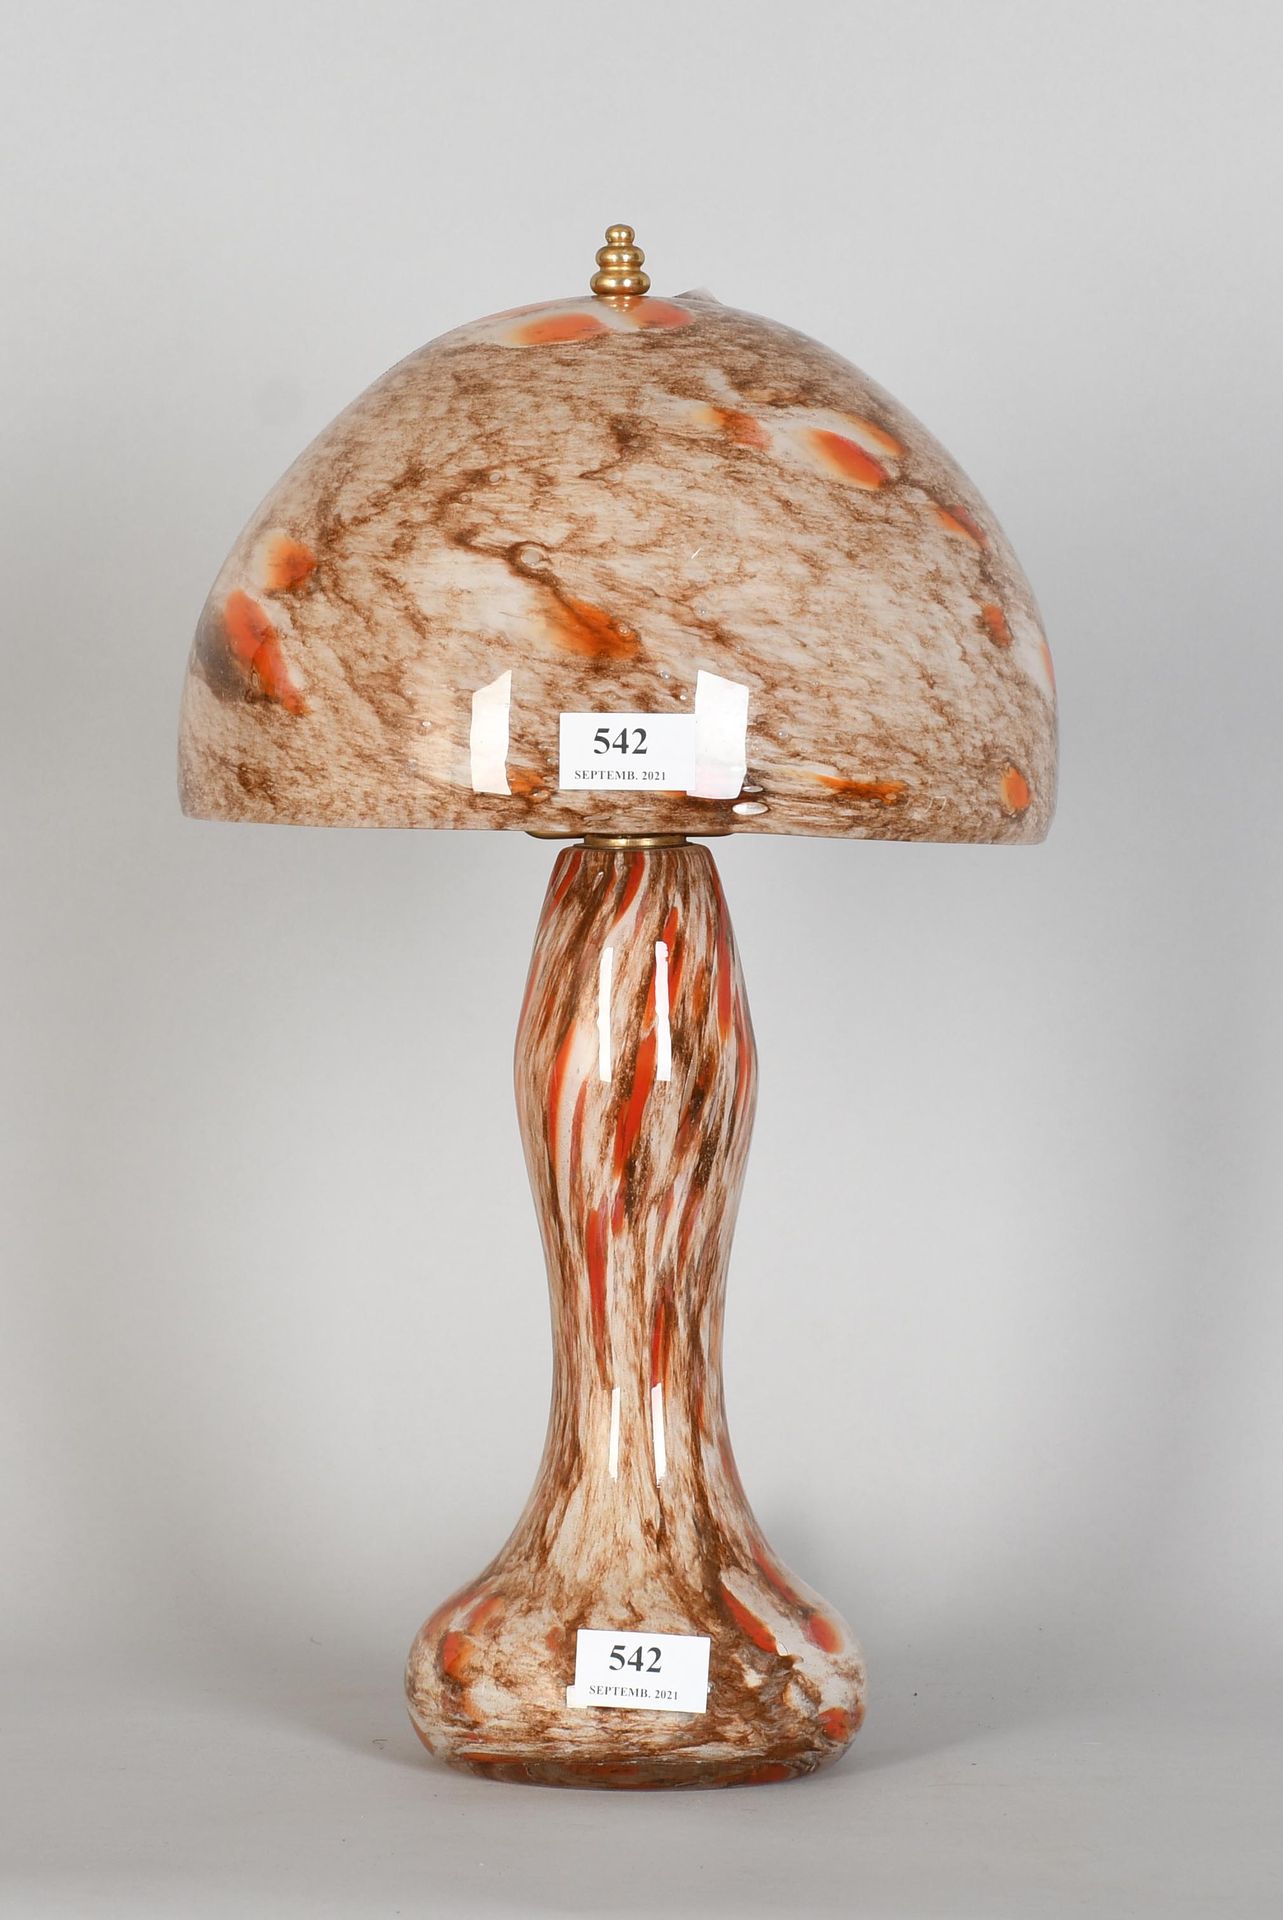 Null La Rochere, France

Mushroom lamp in marbled glass. Height : 45 cm.